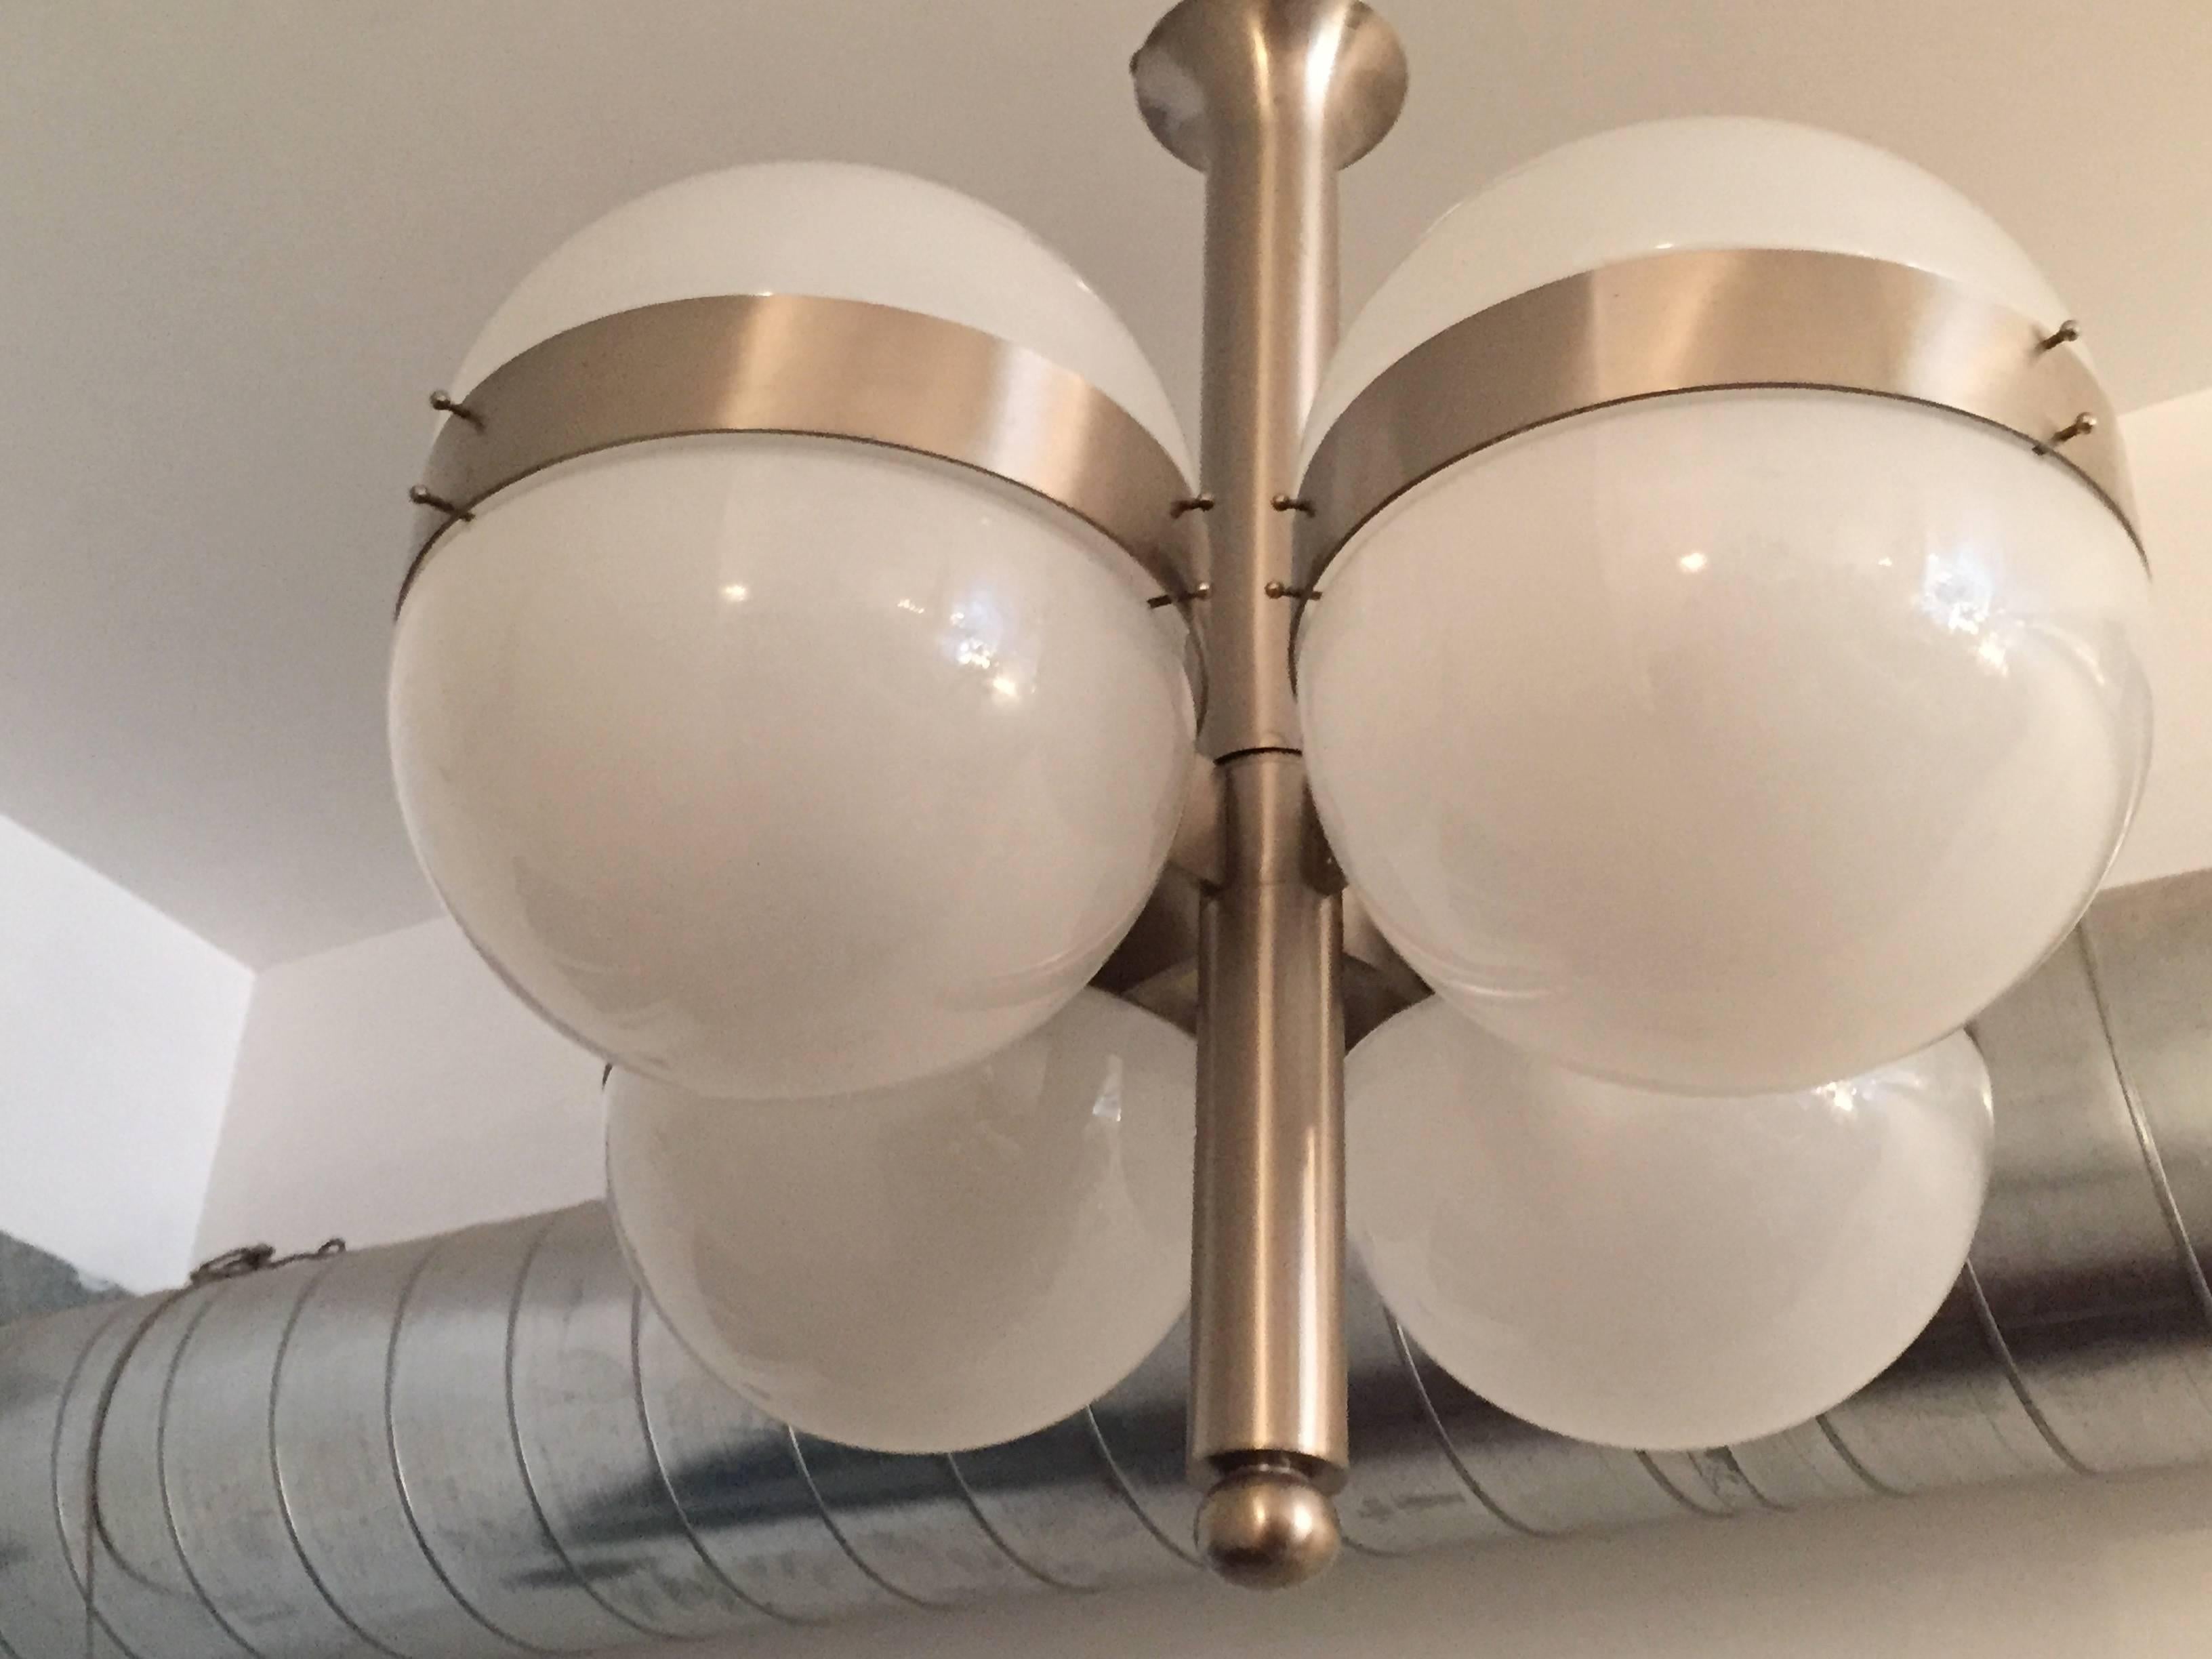 A sleek pair of  modern Italian, 1970s ceiling or hanging pendants composed of a brushed steel fixture with eight opaline glass dome shades. Made by Sergio Mazza for Artemide. Rewired. Matching wall lights.